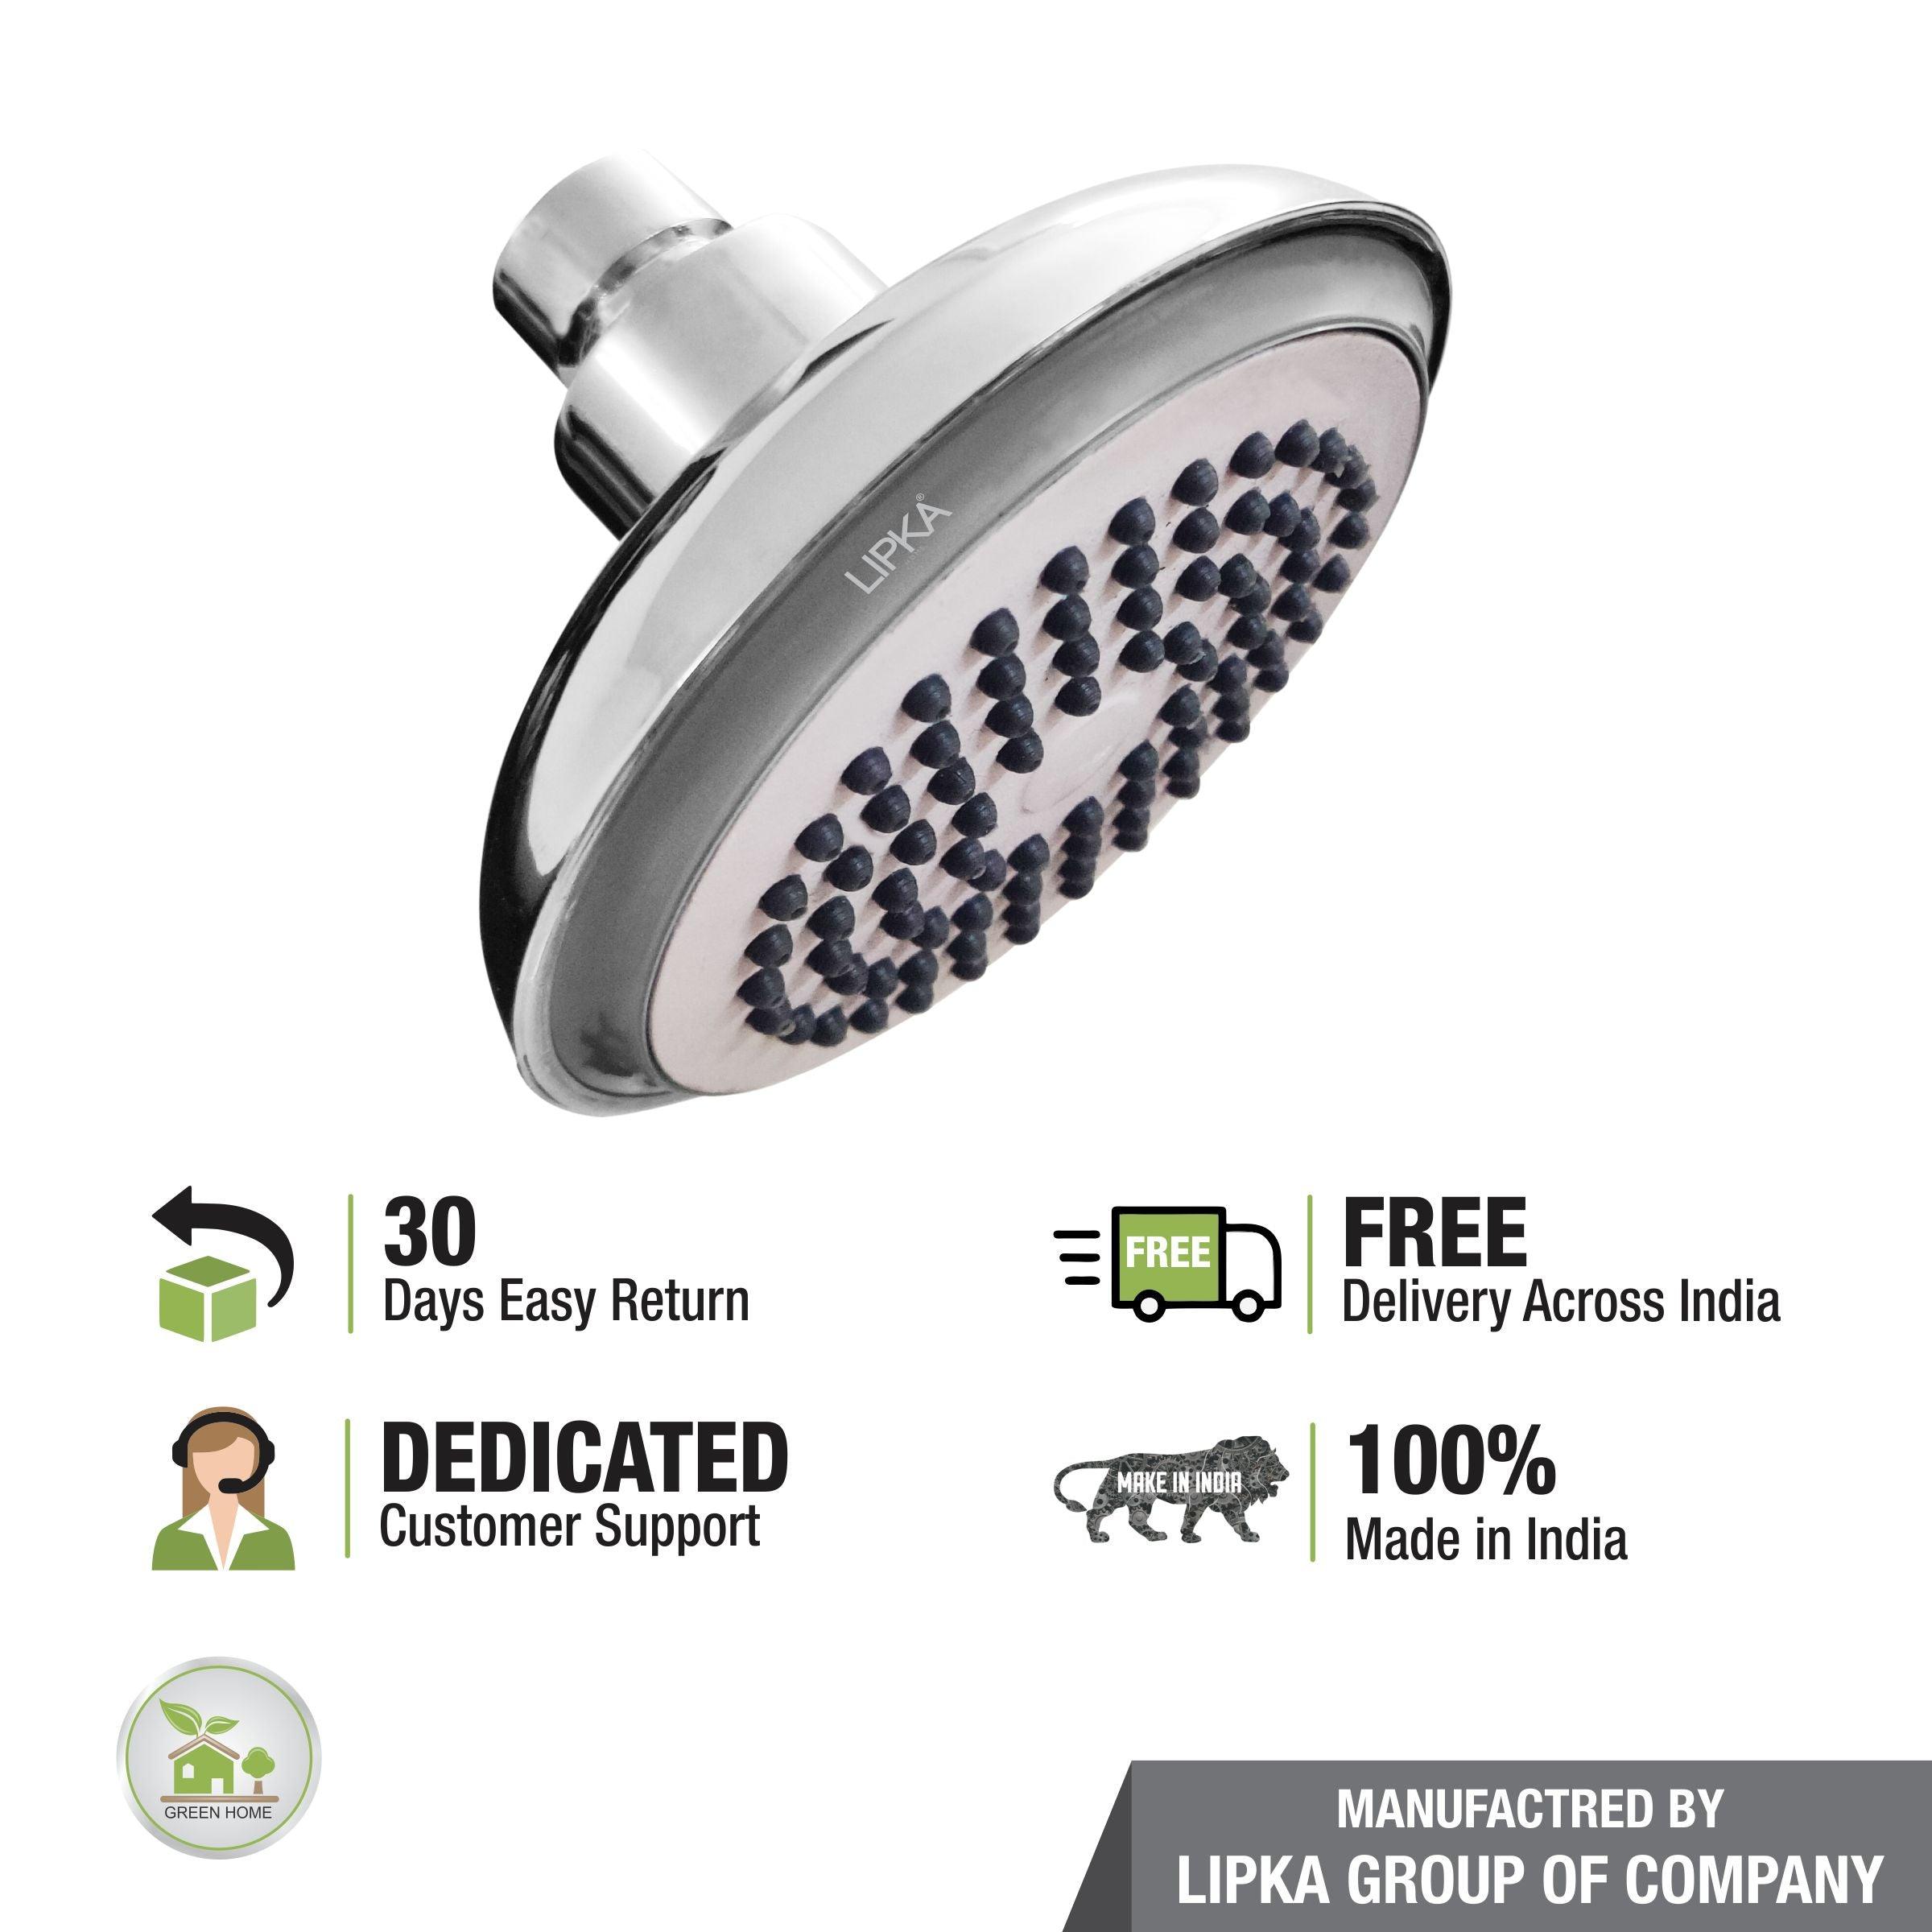 Rio Overhead Shower (4.5 Inches) free delivery